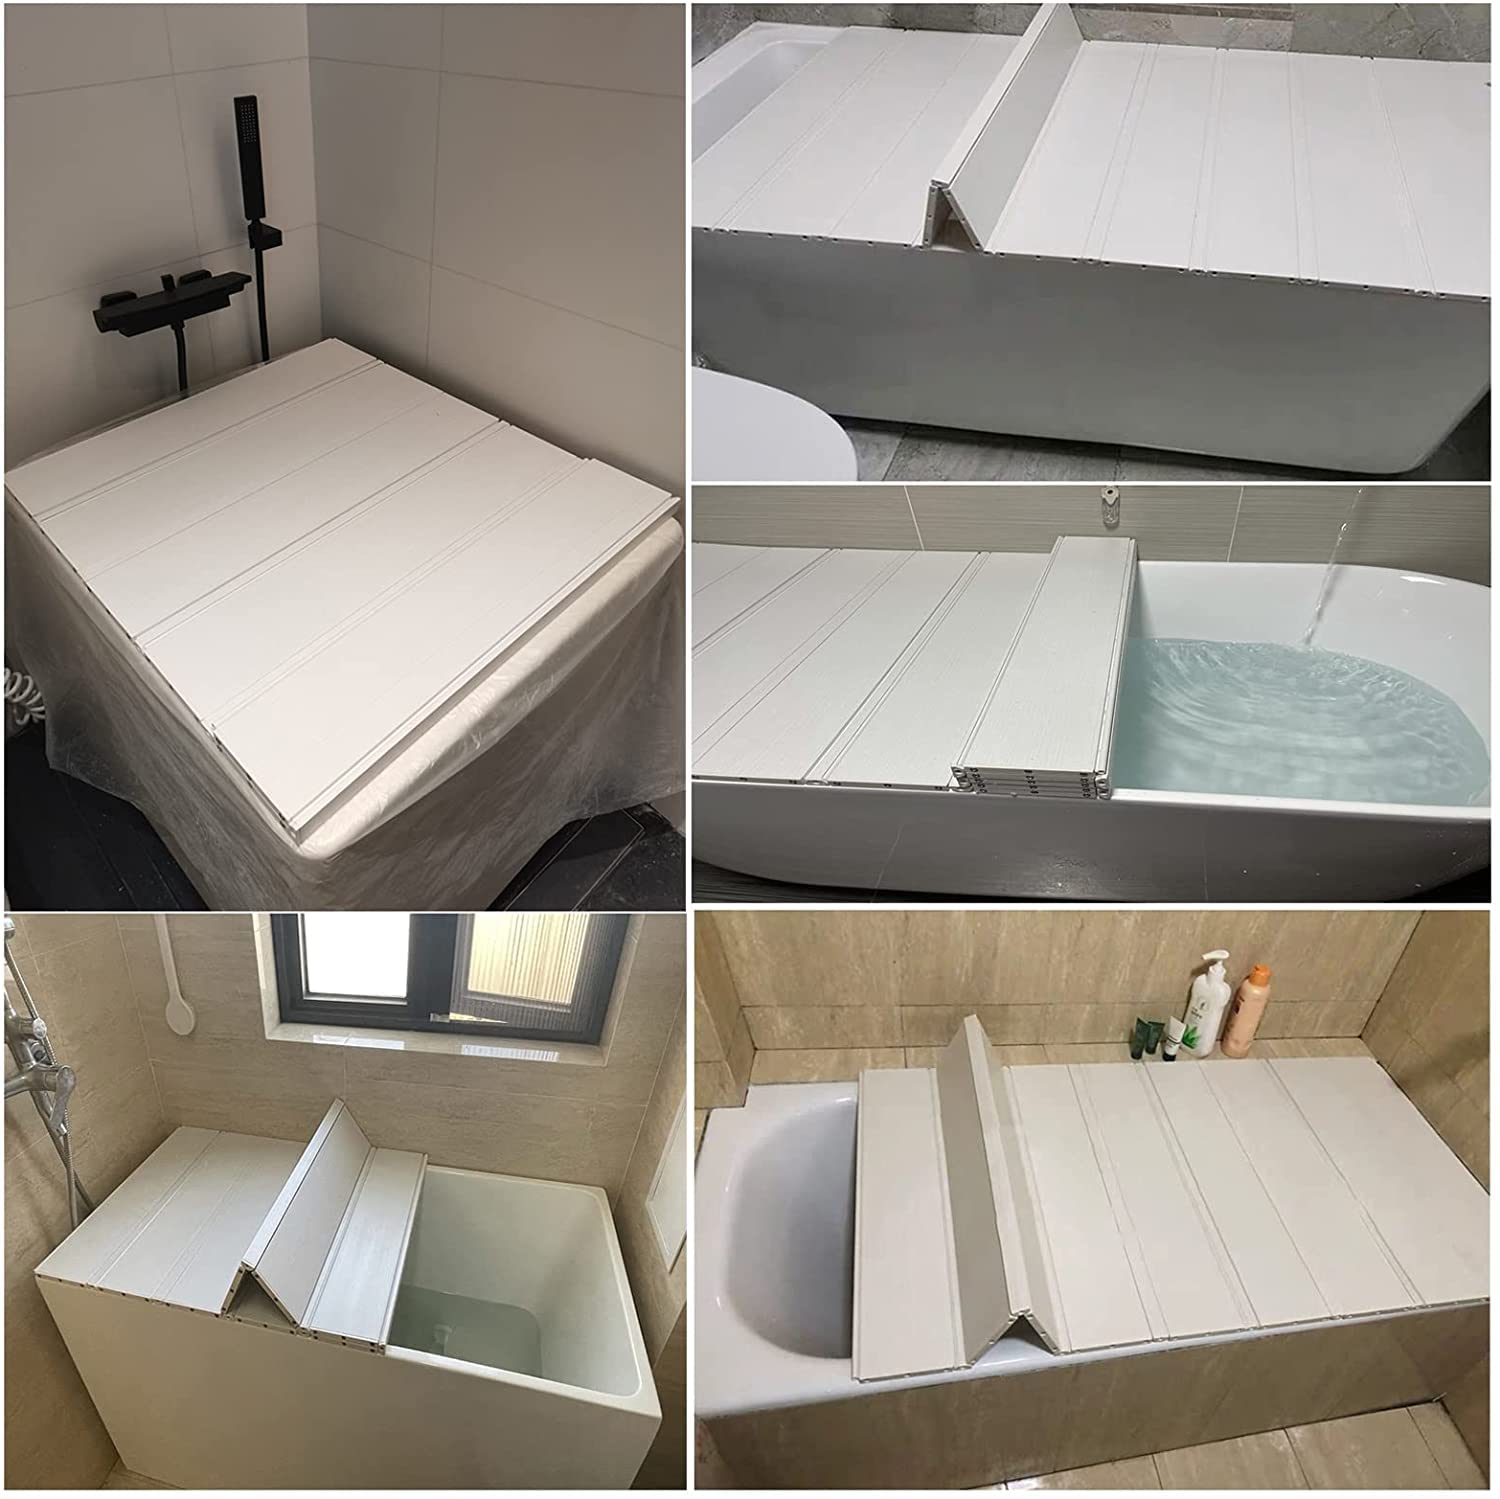 Tray Bathtub Insulation Cover Shutter White Bathtub Dust Board Folding Stand Thicker PVC Convenient Storage Can Place Toiletries (Color : White, Size : 150cmx80cmx1.2cm)